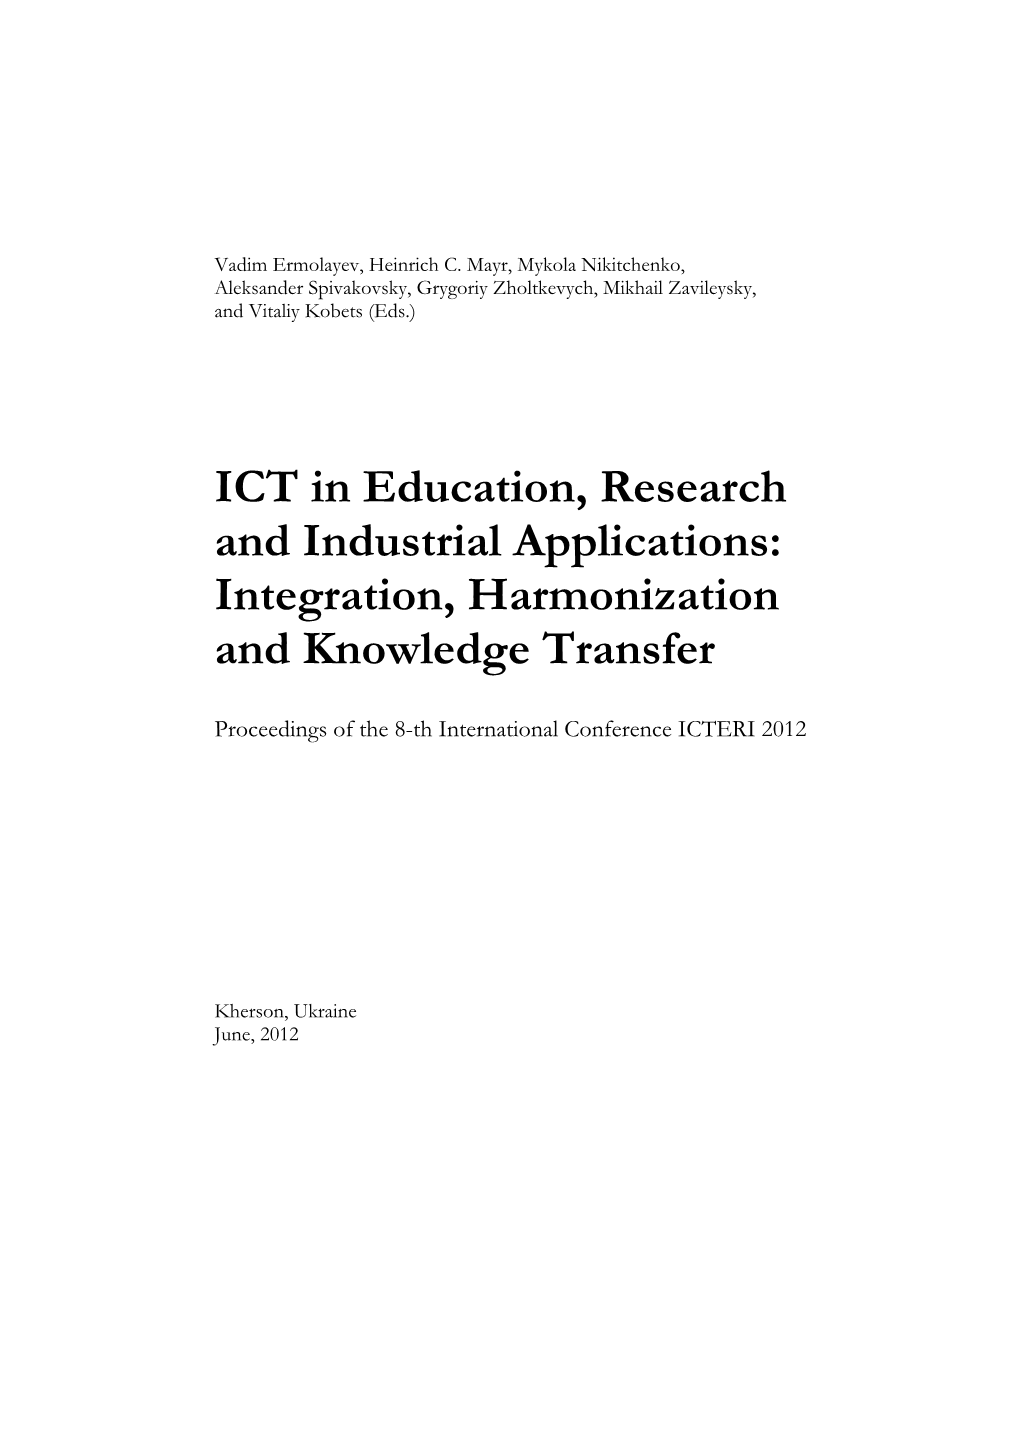 ICT in Education, Research and Industrial Applications: Integration, Harmonization and Knowledge Transfer